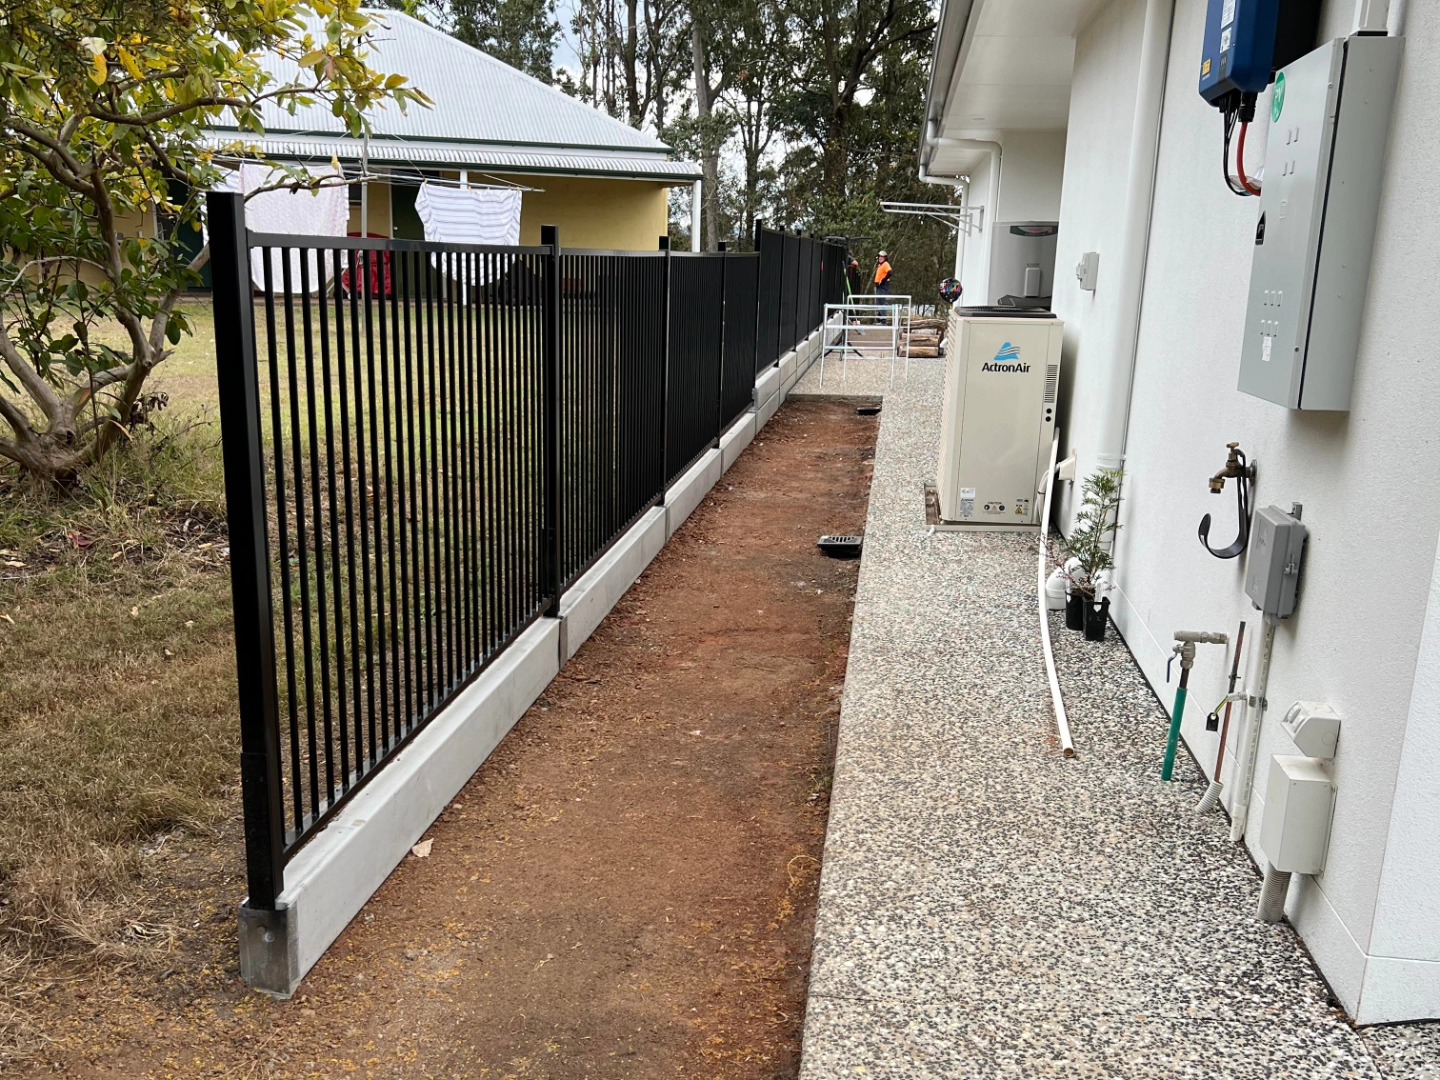 04 Turf preparation at its finest with the addition of a boundary concrete sleeper retaining wall and aluminum tubular fence